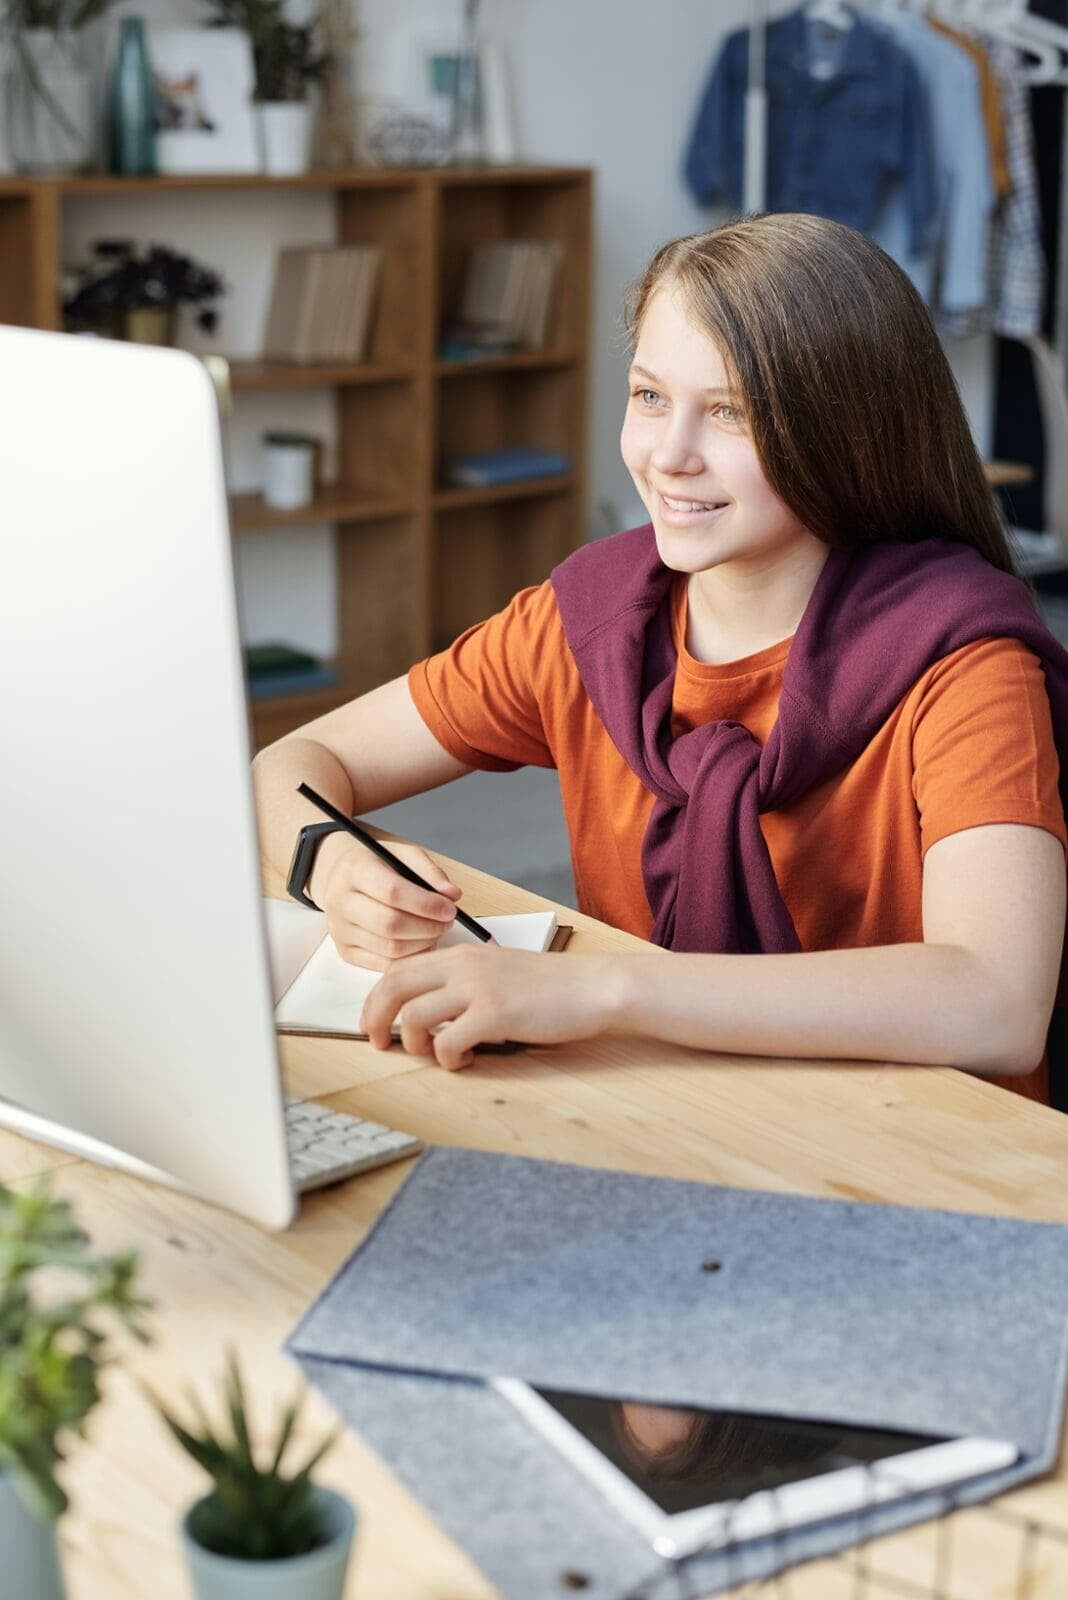 woman in orange shirt writing on white paper as she takes online course